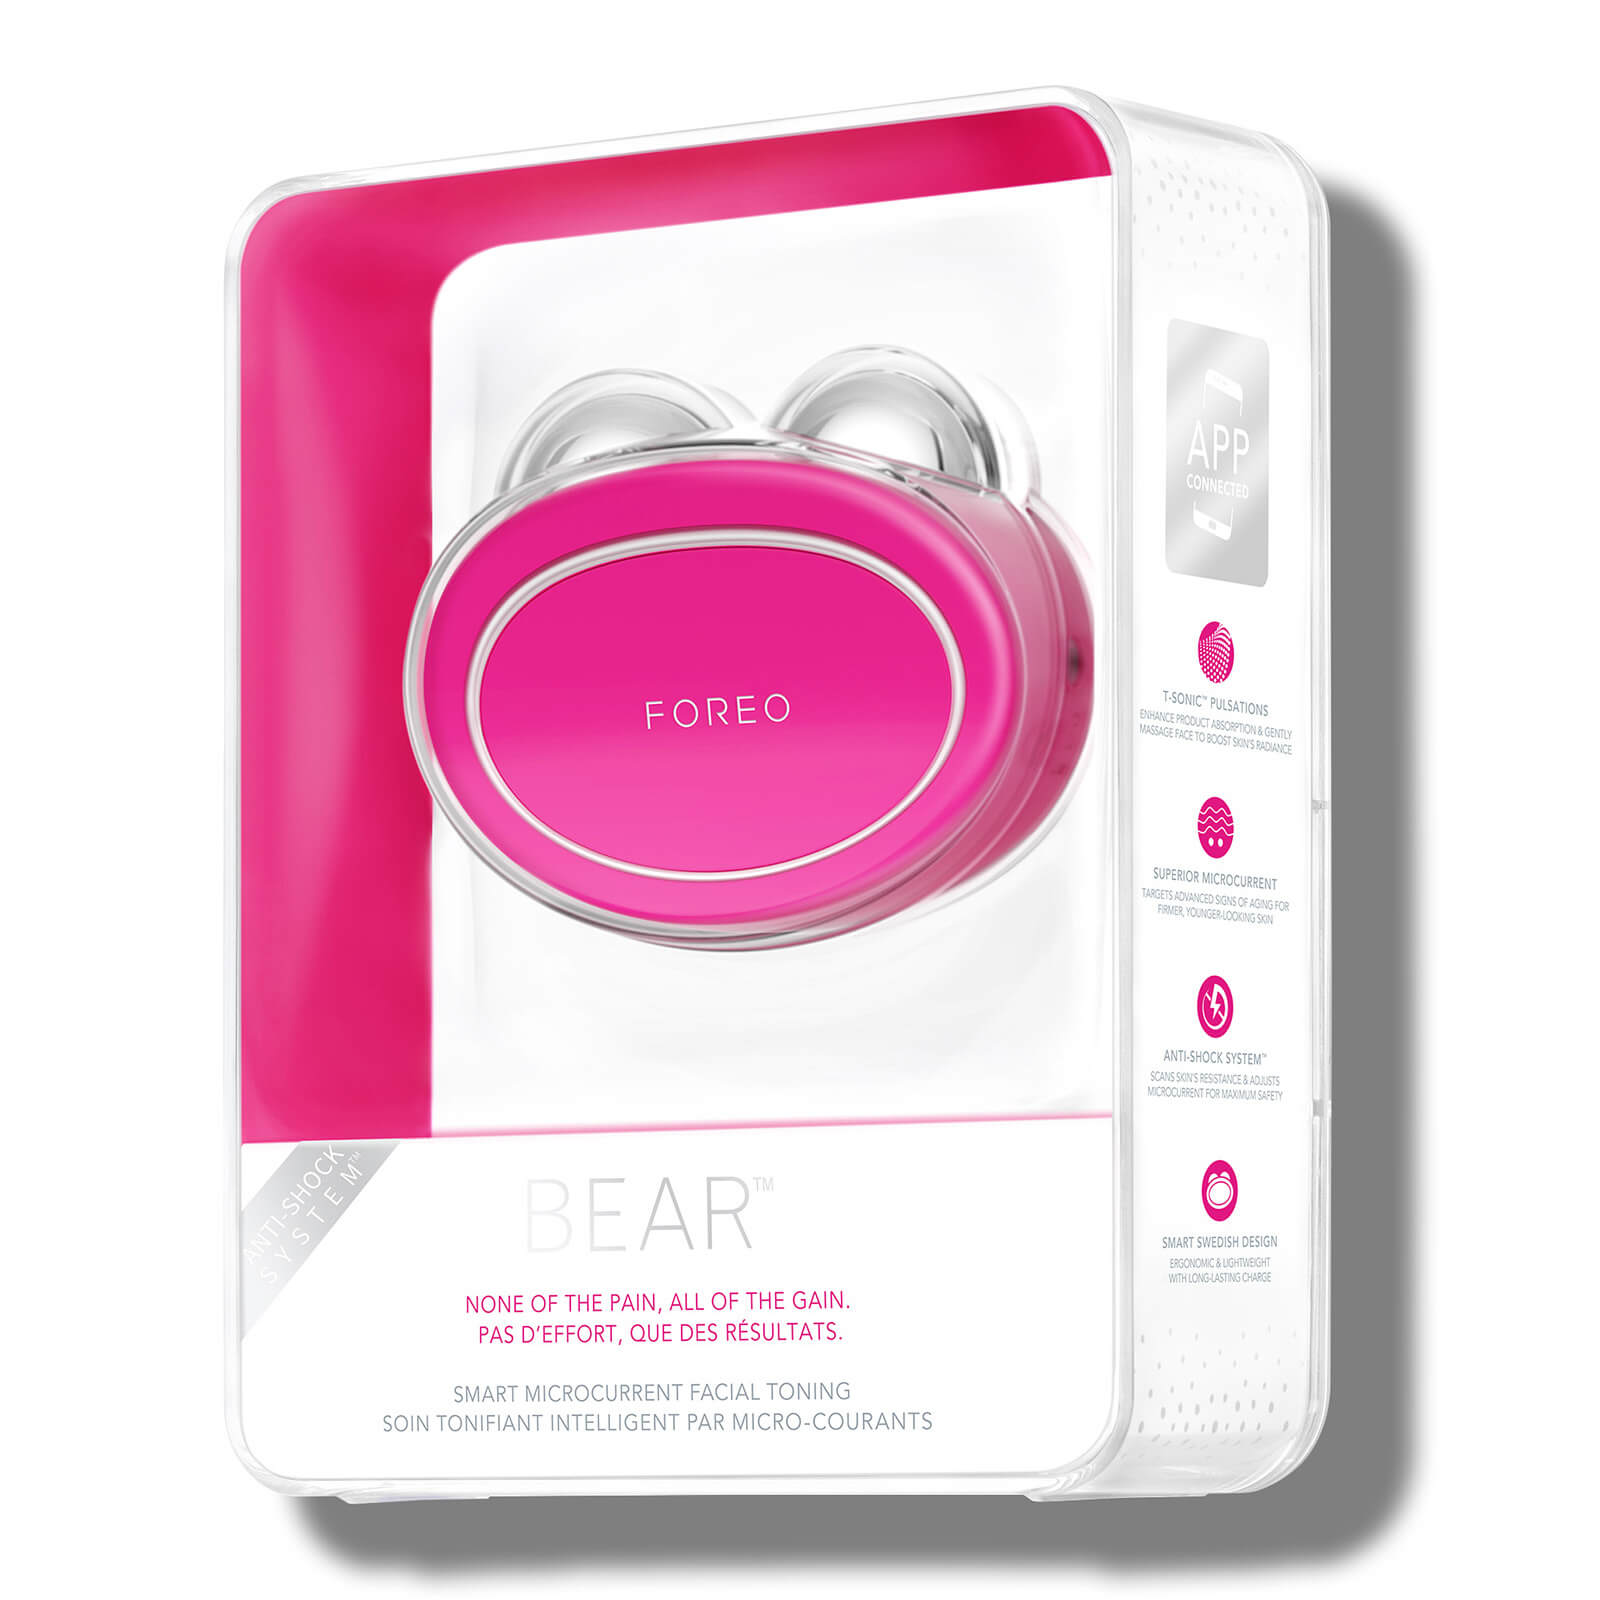 FOREO Bear Microcurrent Facial Toning Device With 5 Intensities (Διάφορες αποχρώσεις) - Fuchsia